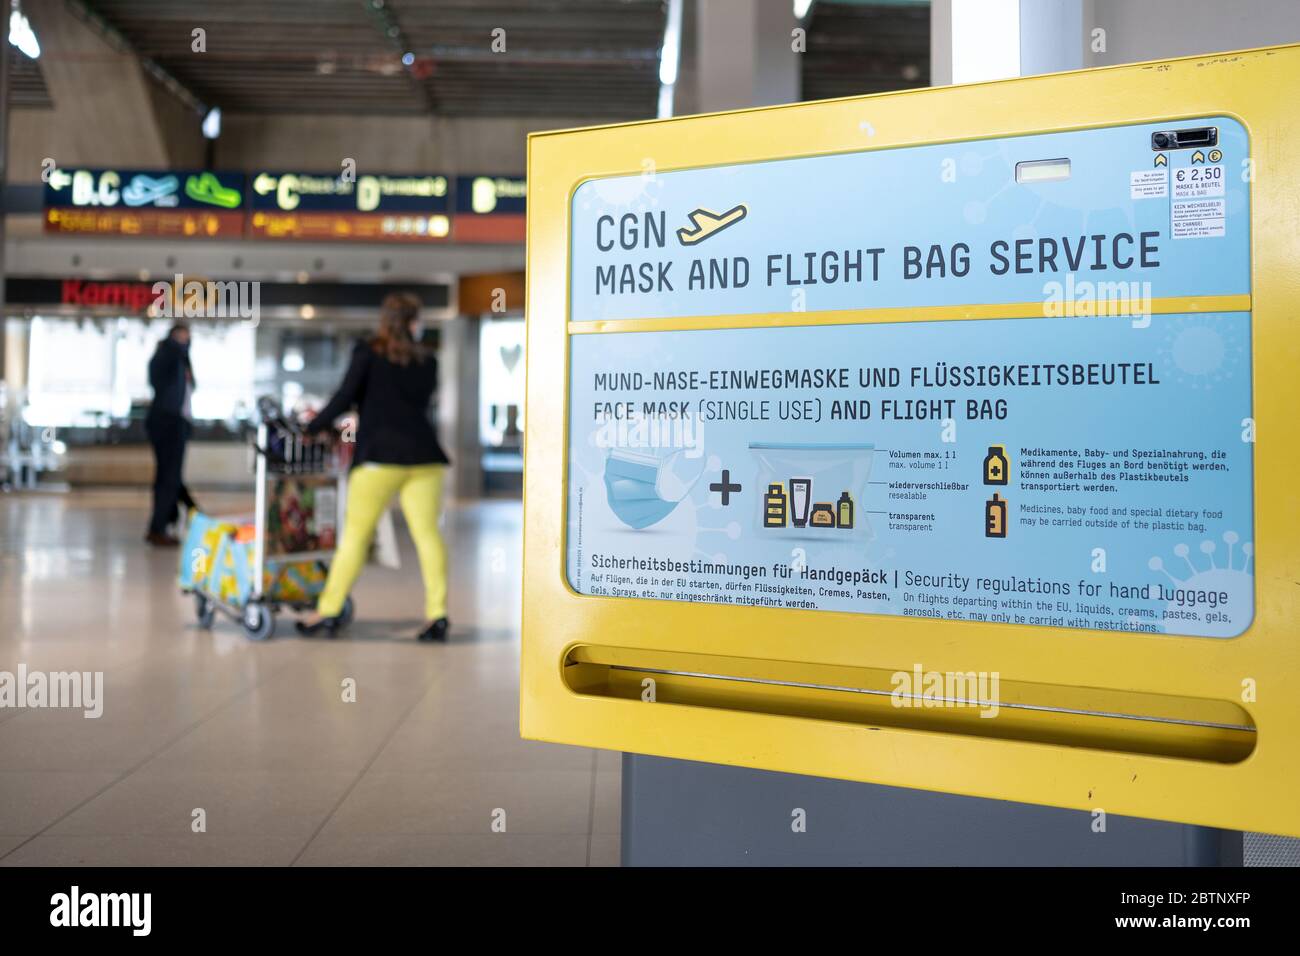 Cologne, Germany. 27th May, 2020. A vending machine for mouth-nose masks  and fluid bags hangs in the terminal of Cologne/Bonn Airport. Cologne/Bonn  Airport and the airline Eurowings provided information on extended health